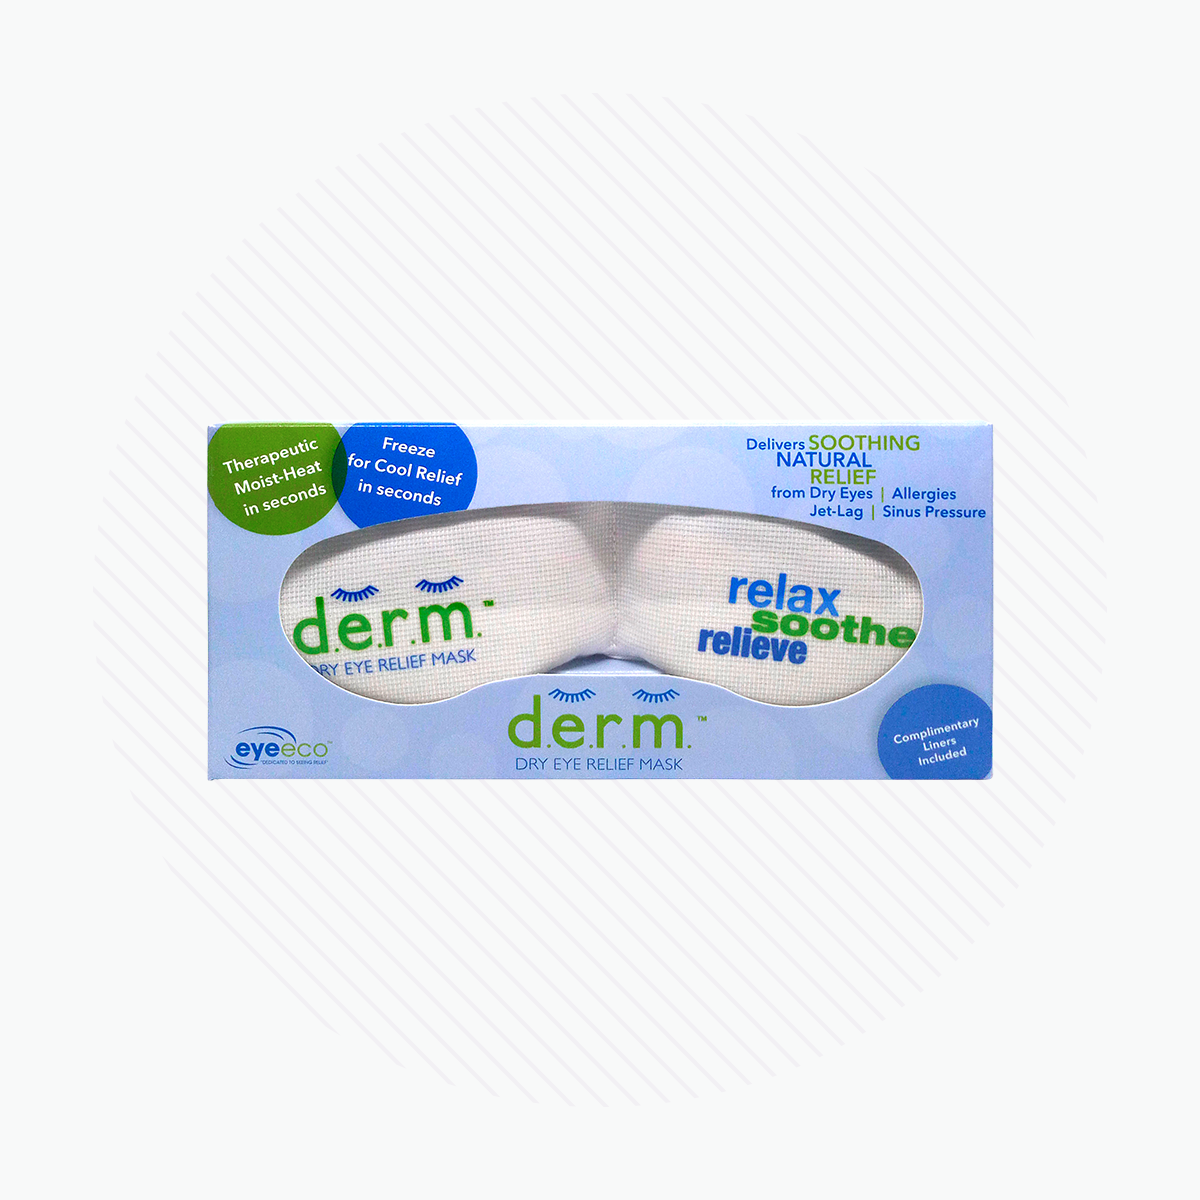 EyeEco D.E.R.M. Heat Mask for Mild Dry Eye Relief (Mask Only. No Cotton Liners)